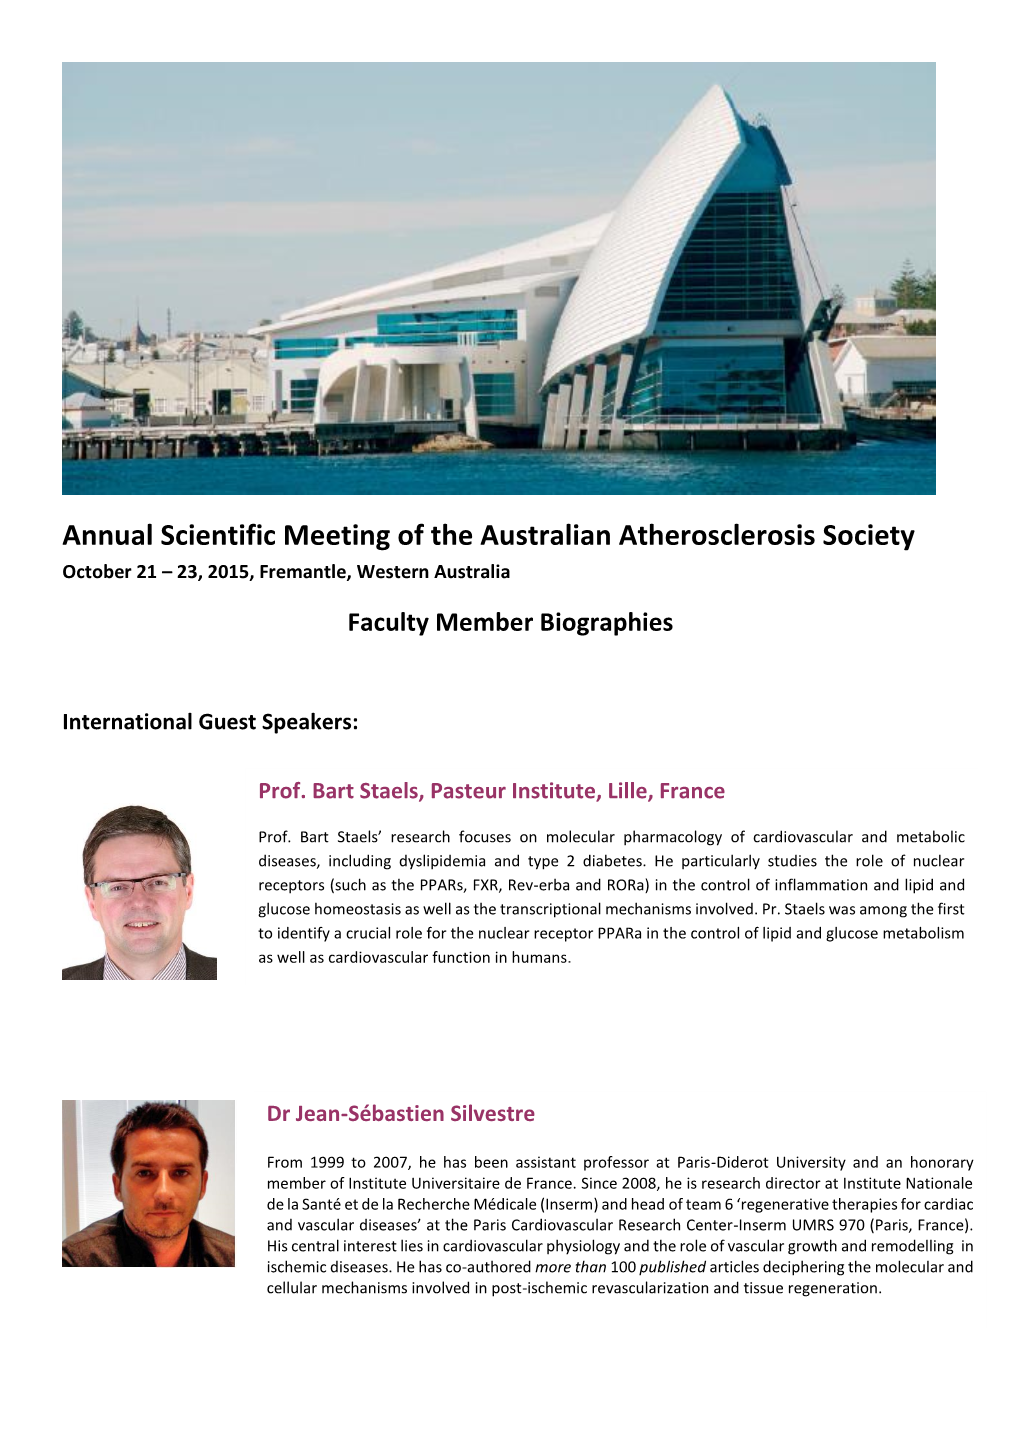 Annual Scientific Meeting of the Australian Atherosclerosis Society October 21 – 23, 2015, Fremantle, Western Australia Faculty Member Biographies